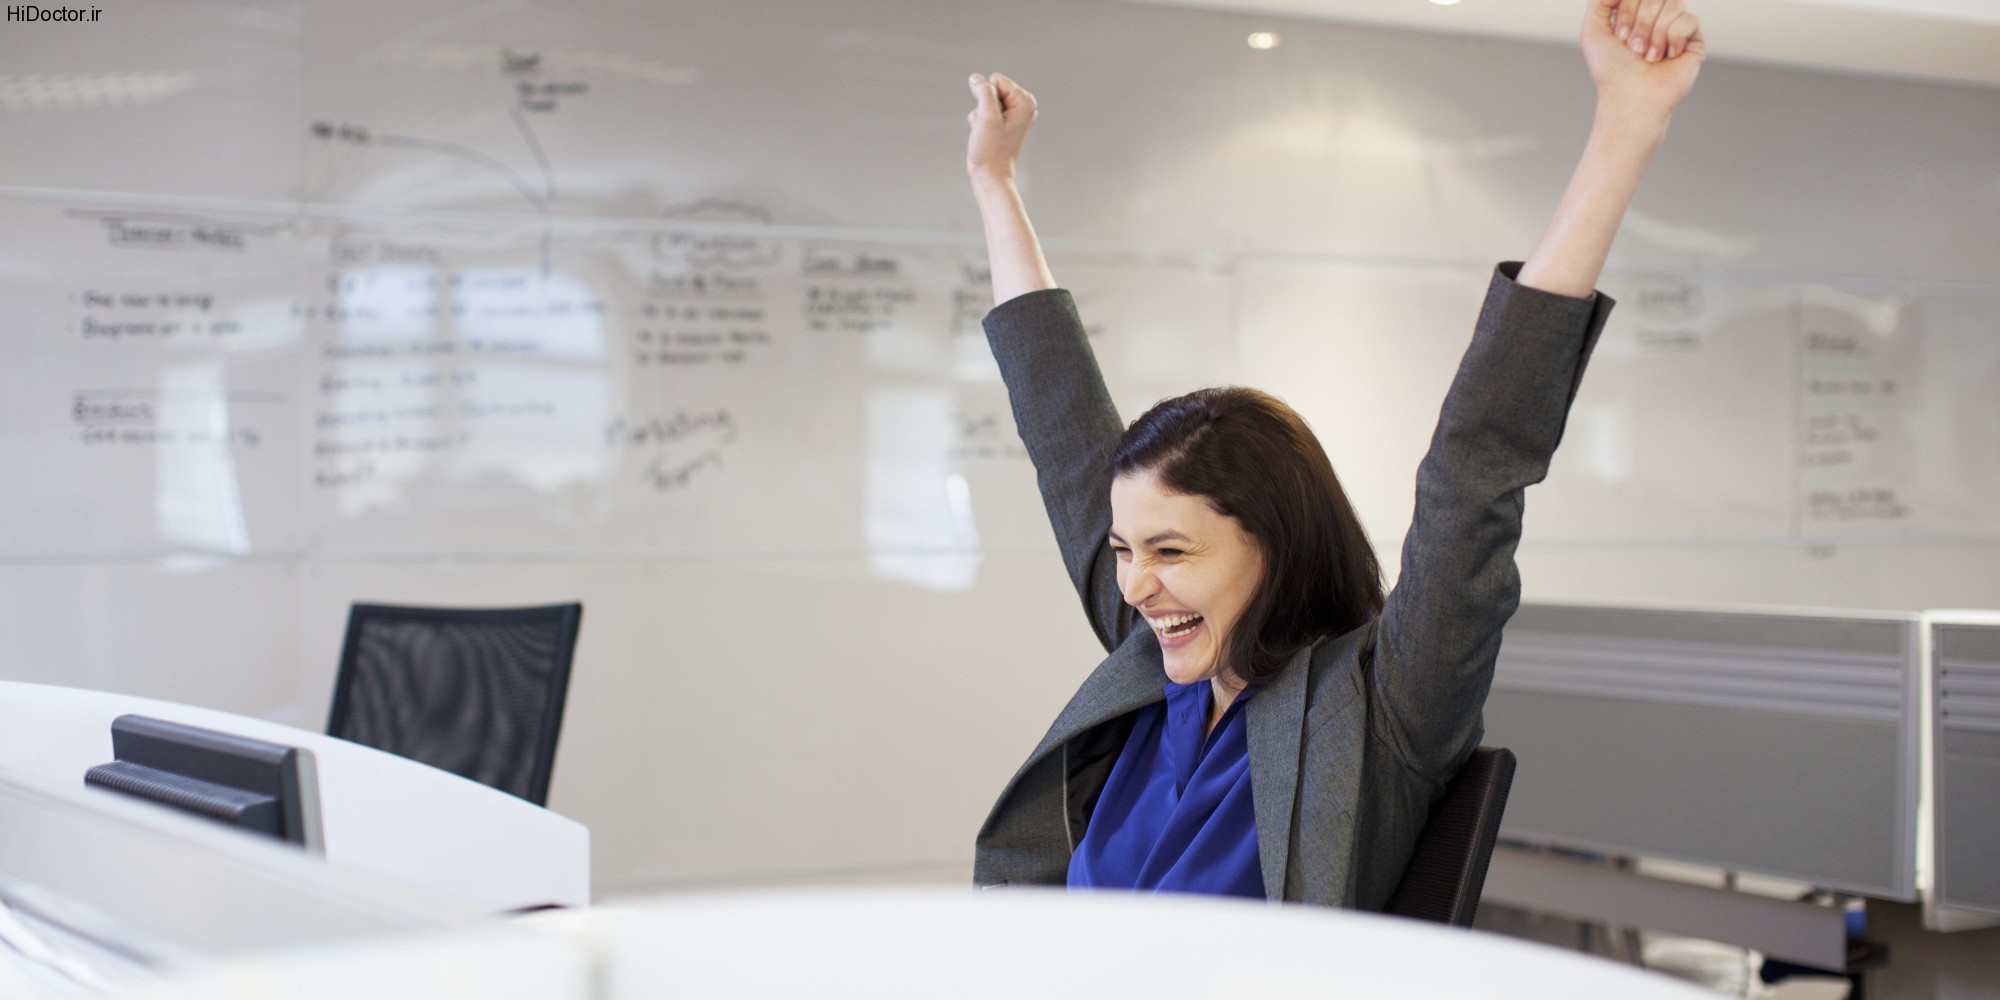 Enthusiastic businesswoman with arms raised in office